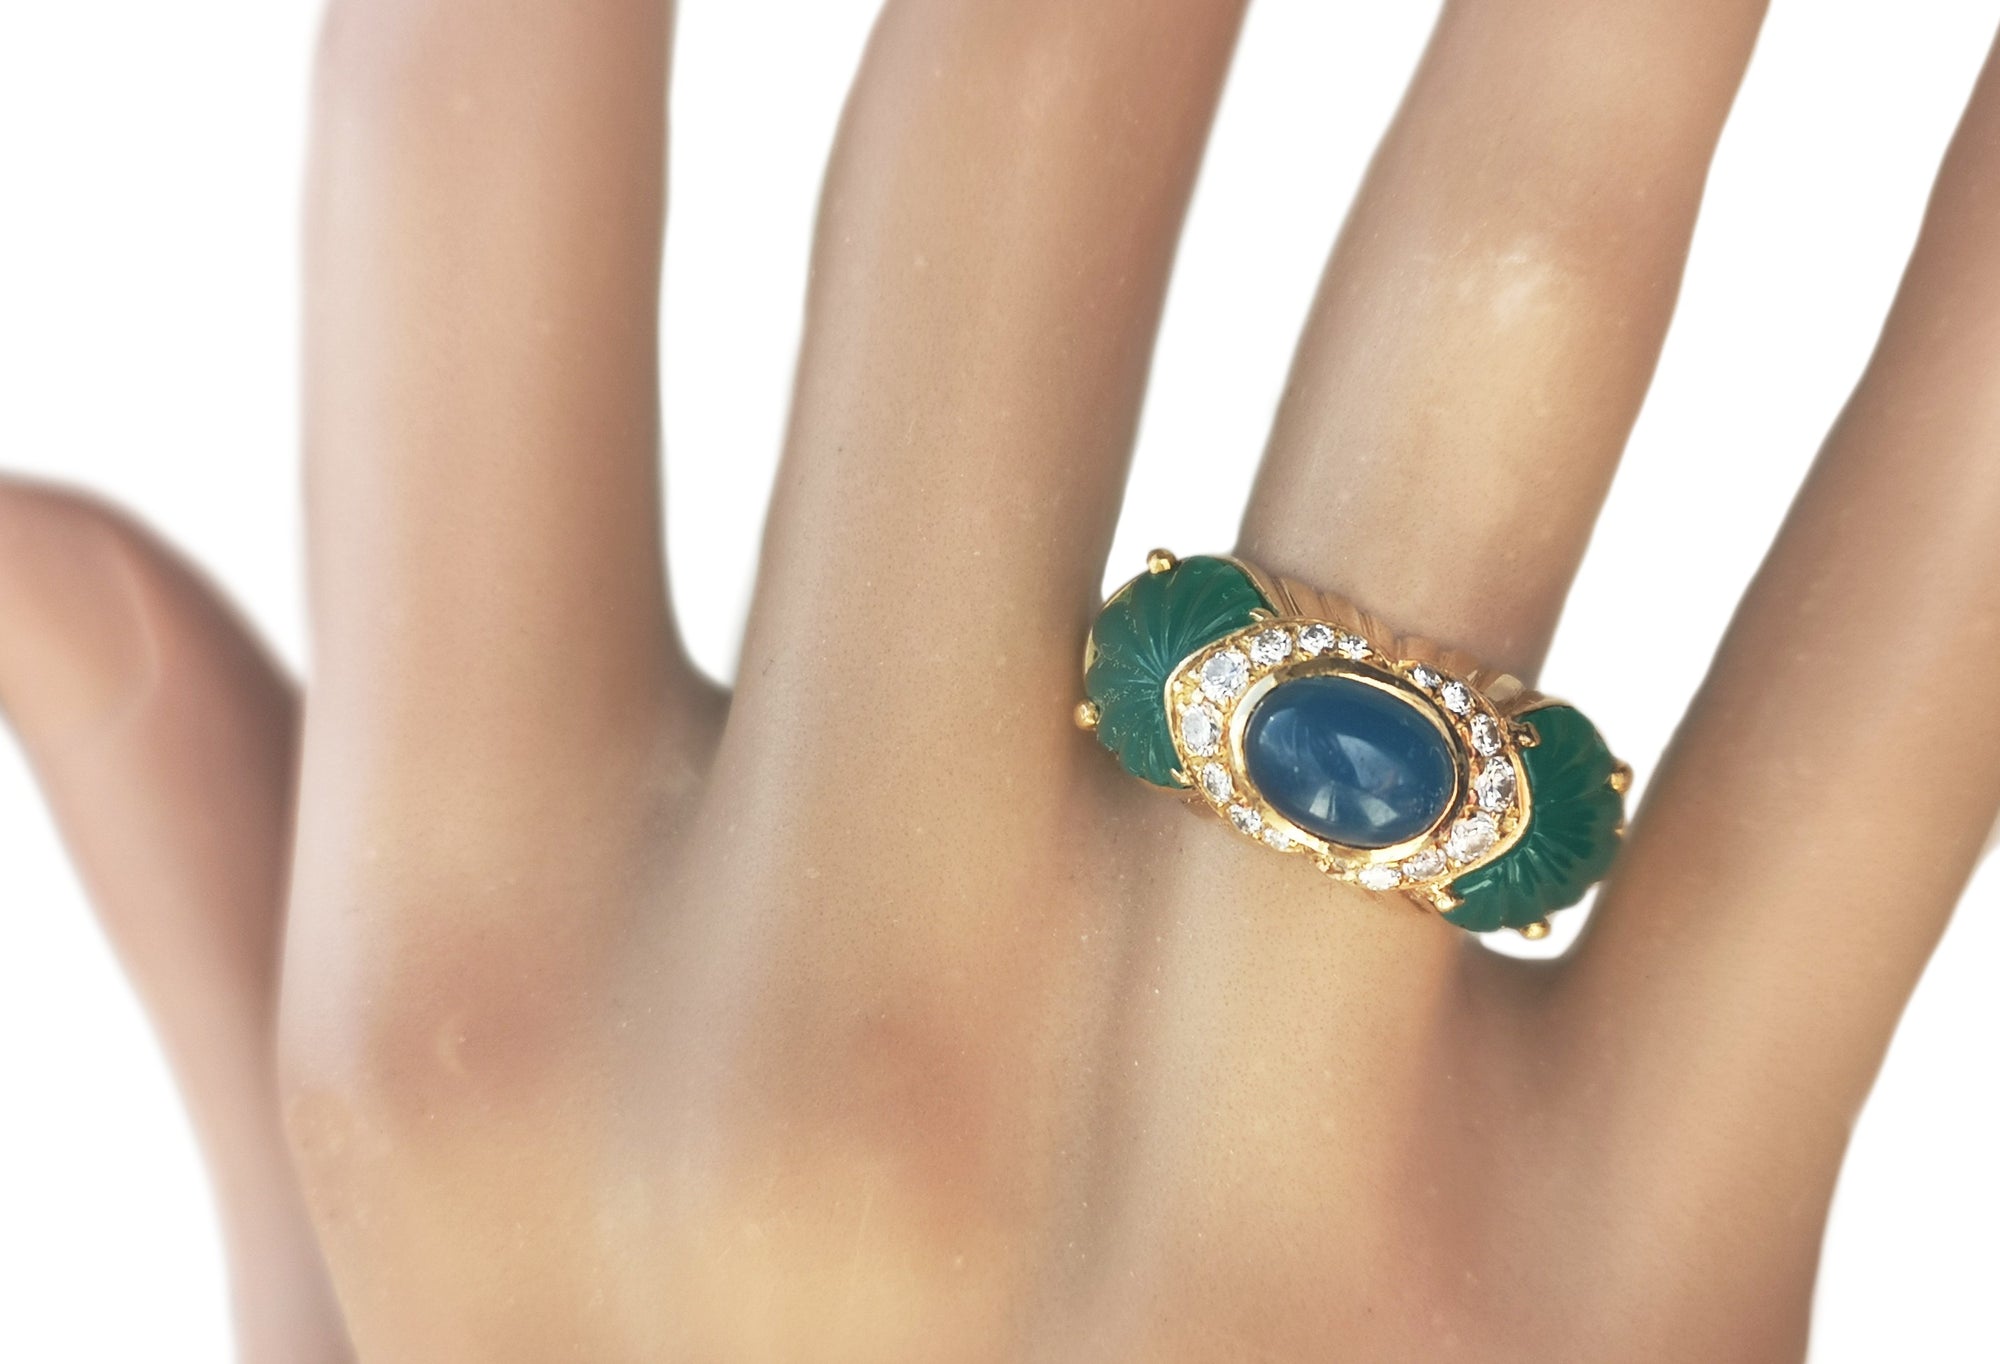 Vintage Cartier Carved Chalcedony, Chrysoprase & Diamond Ring